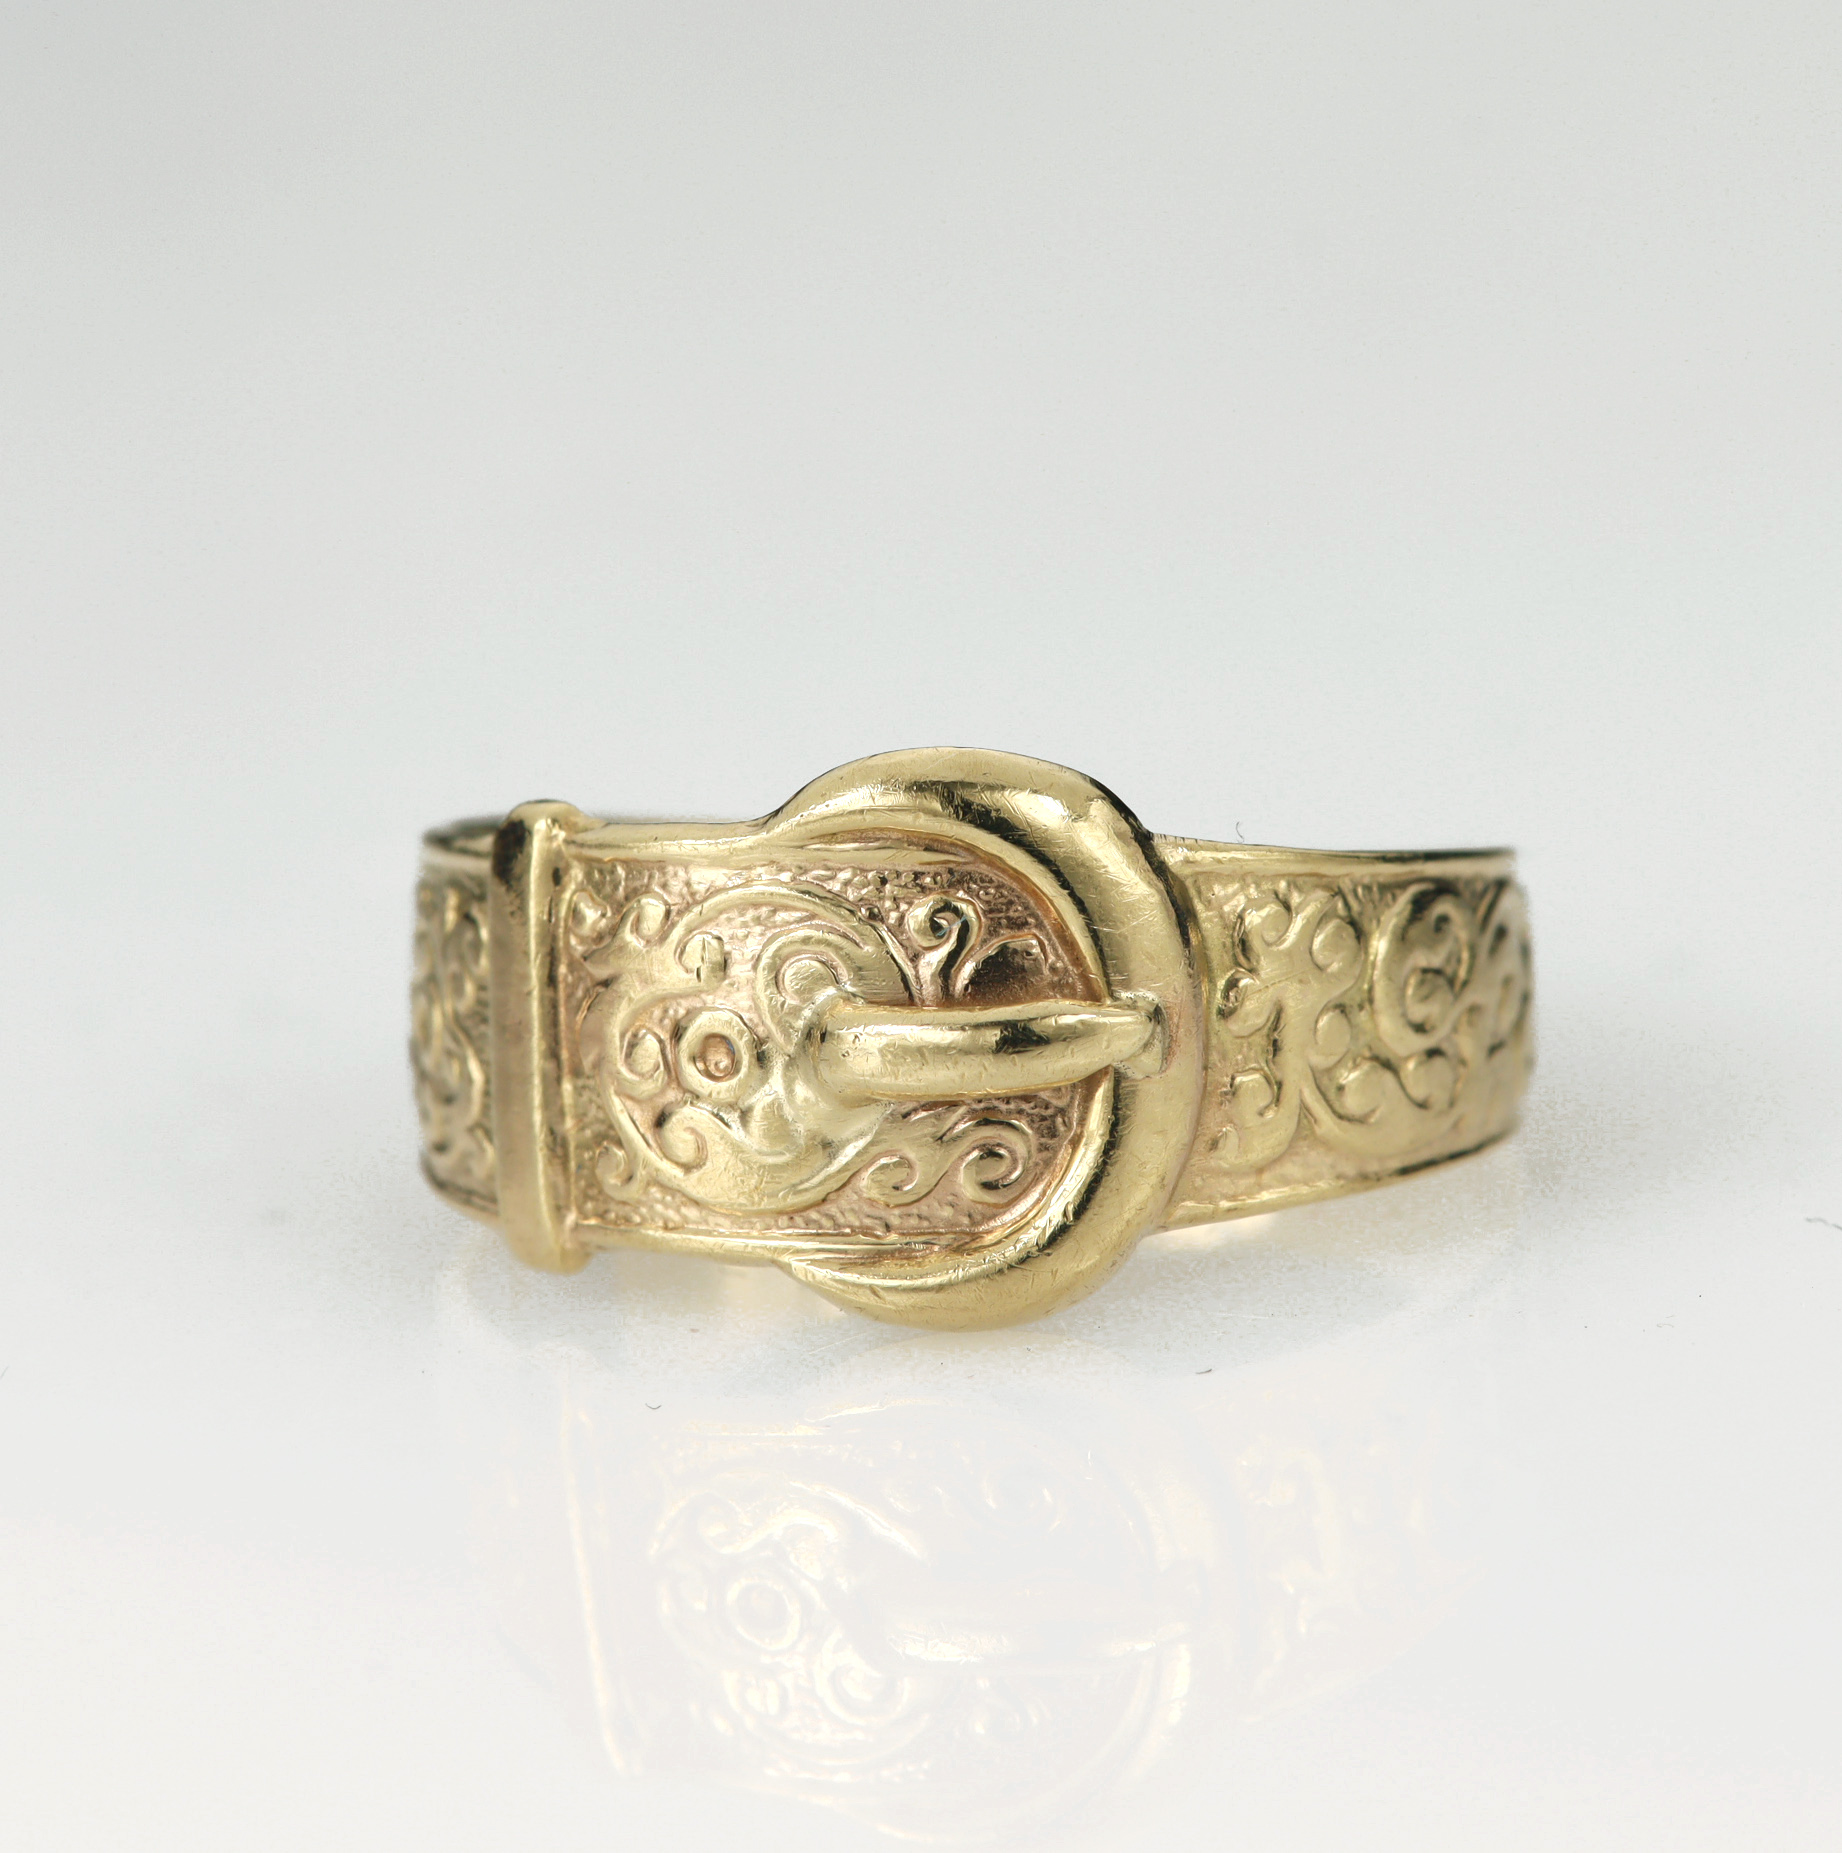 9ct yellow gold buckle ring, engraved with scroll details, finger size T/U, weight 4.1g.